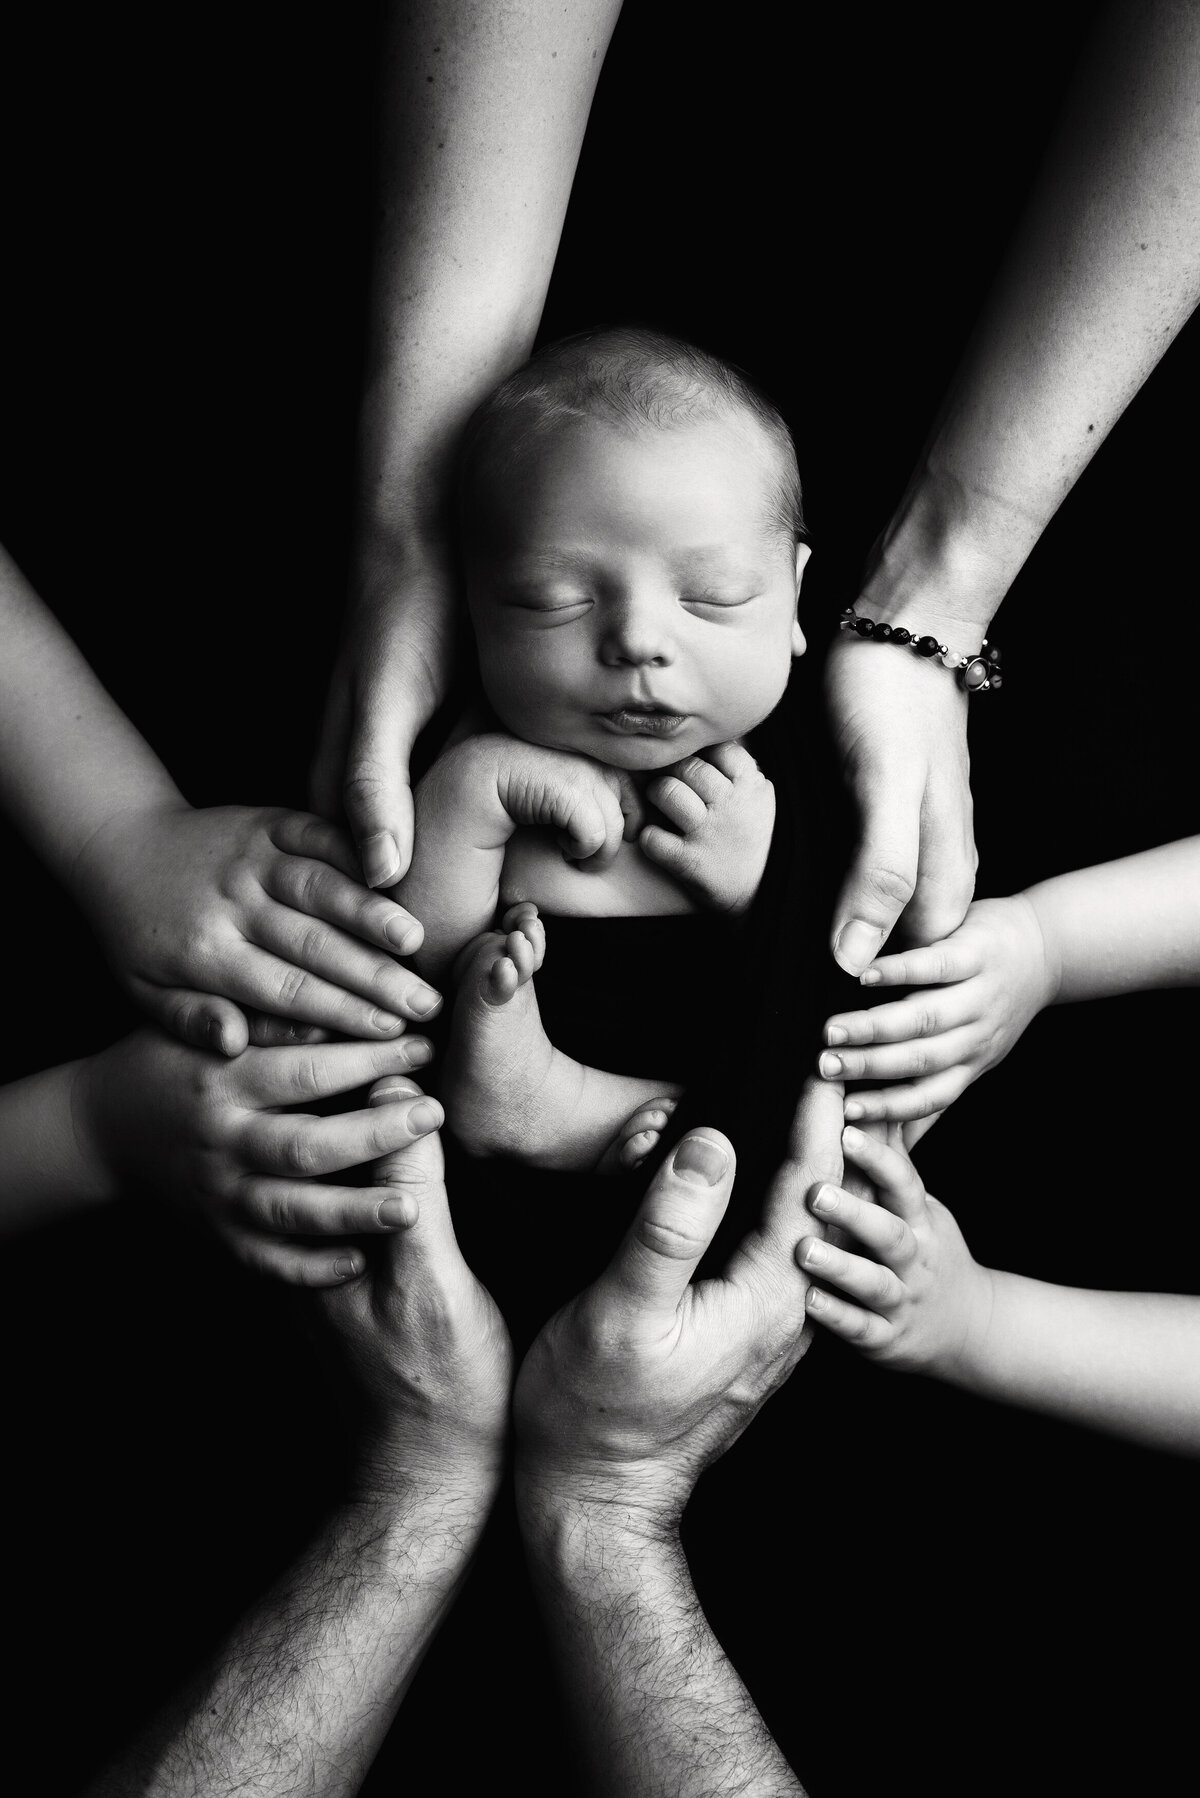 st-louis-newborn-photographer-black-and-white-photo-of-baby-cradled-by-four-sets-of-hands-wrapped-in-dark-cloth